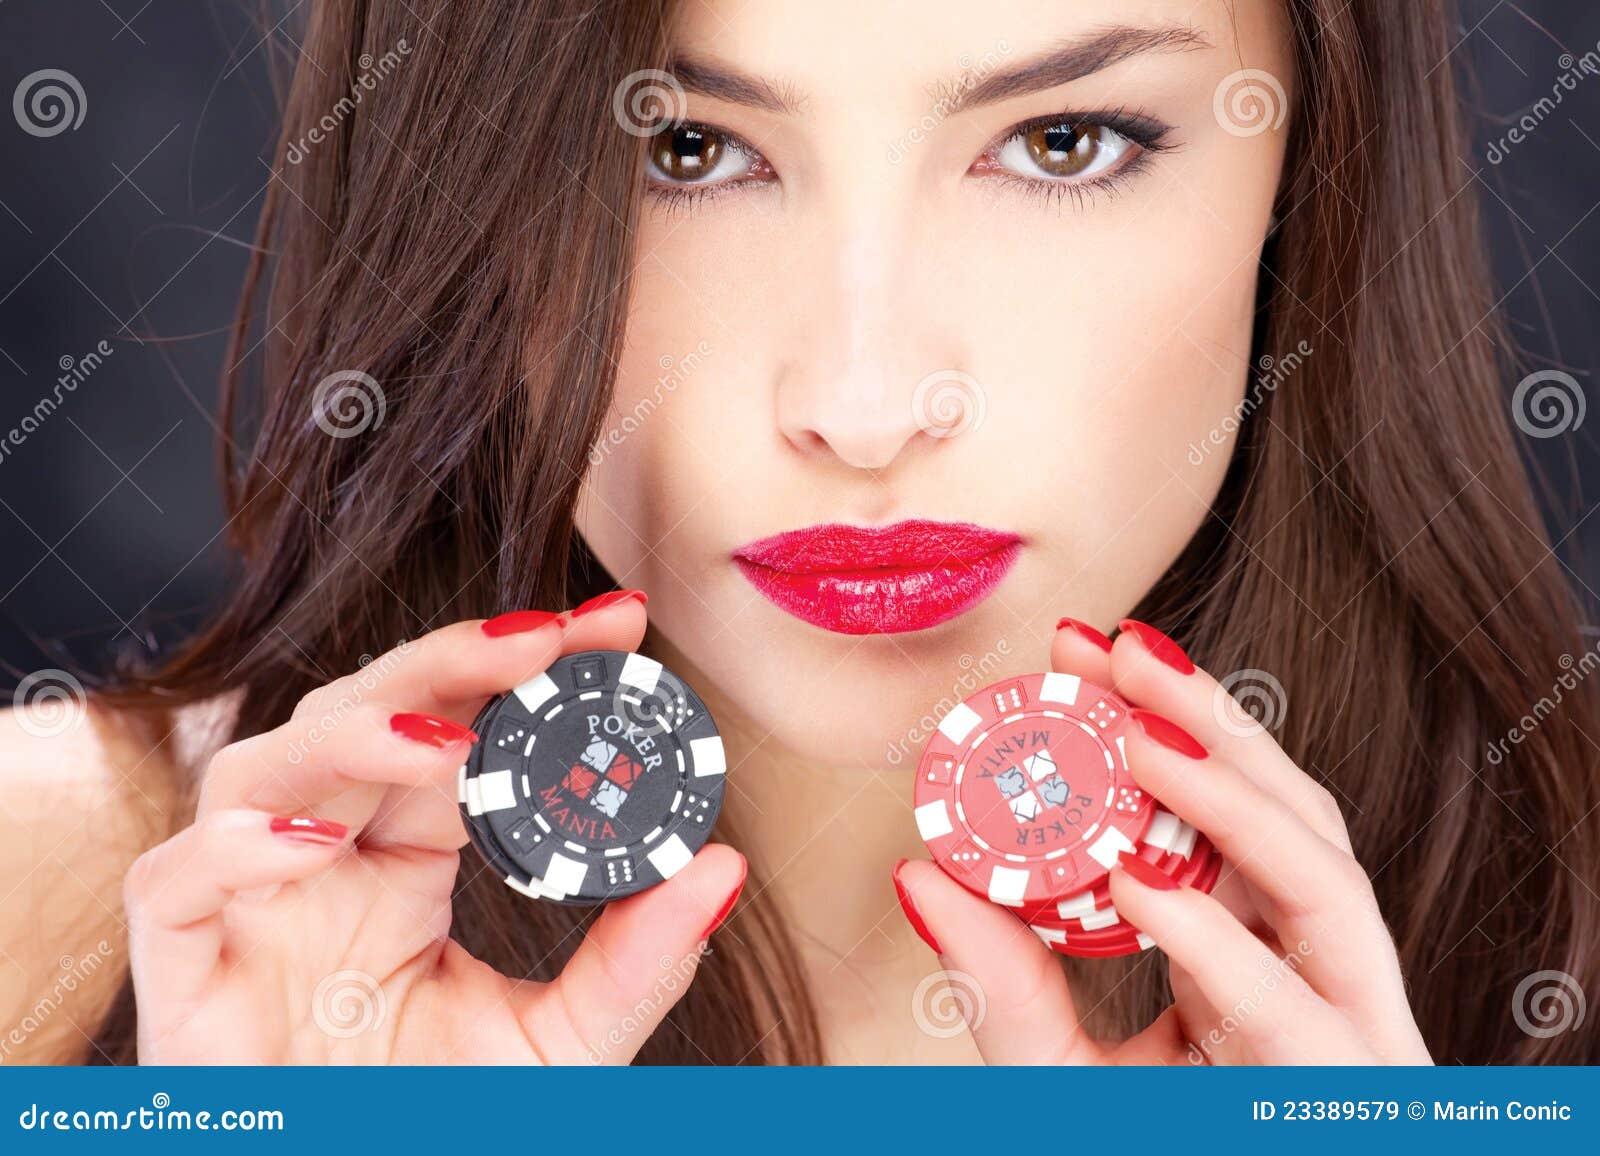 Woman and gambling chips stock image. Image of flush - 23389579